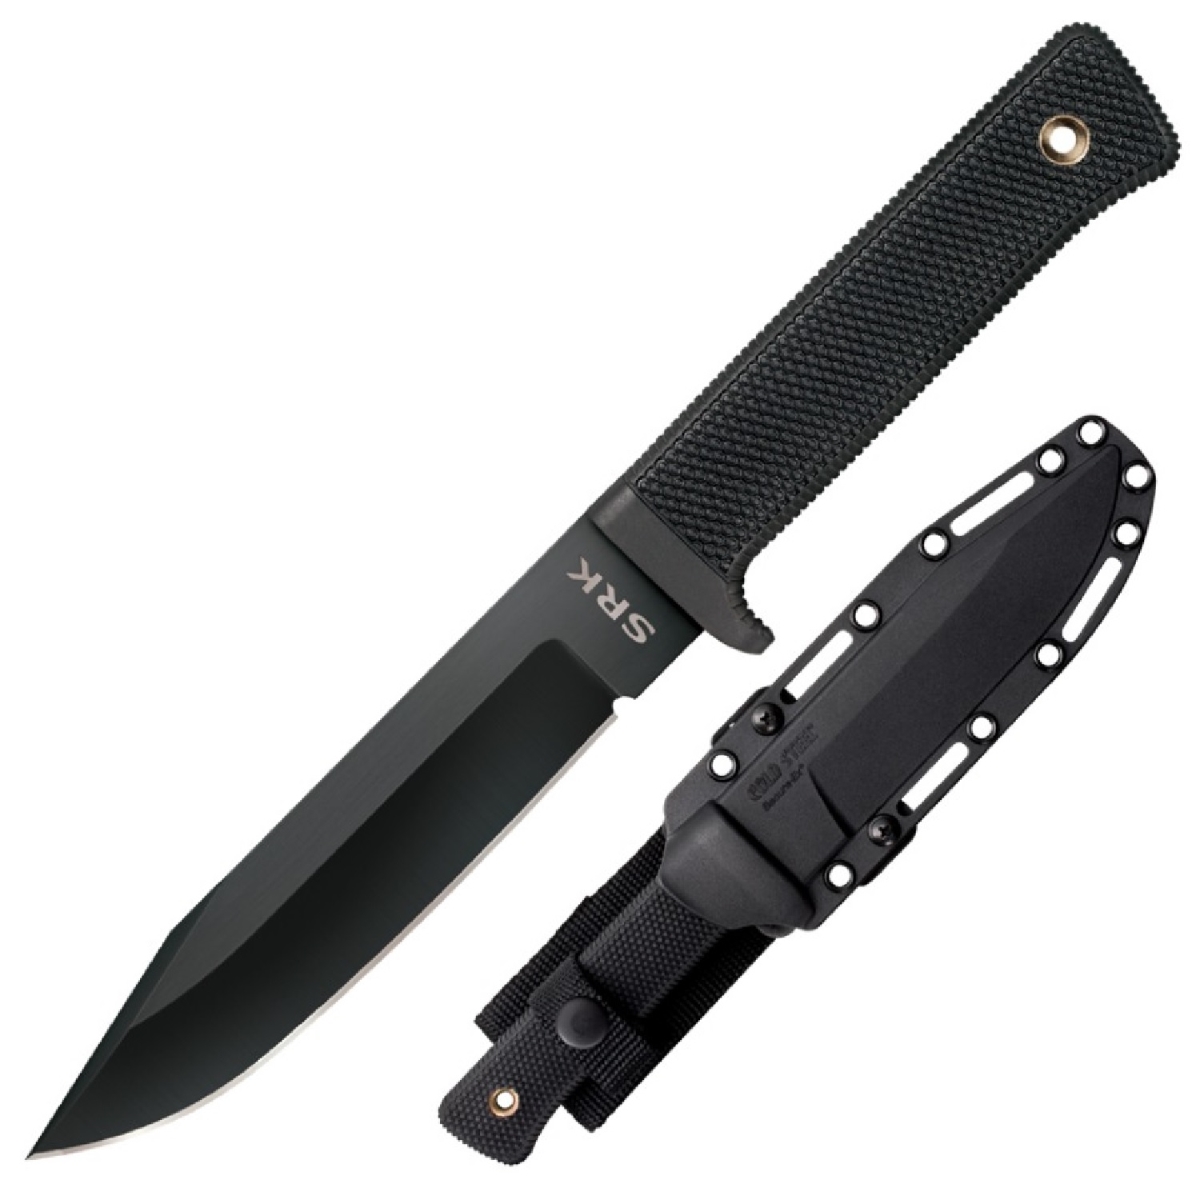 49lck 6 In. Srk Fixed Blade With Black Plain Polymer Handle